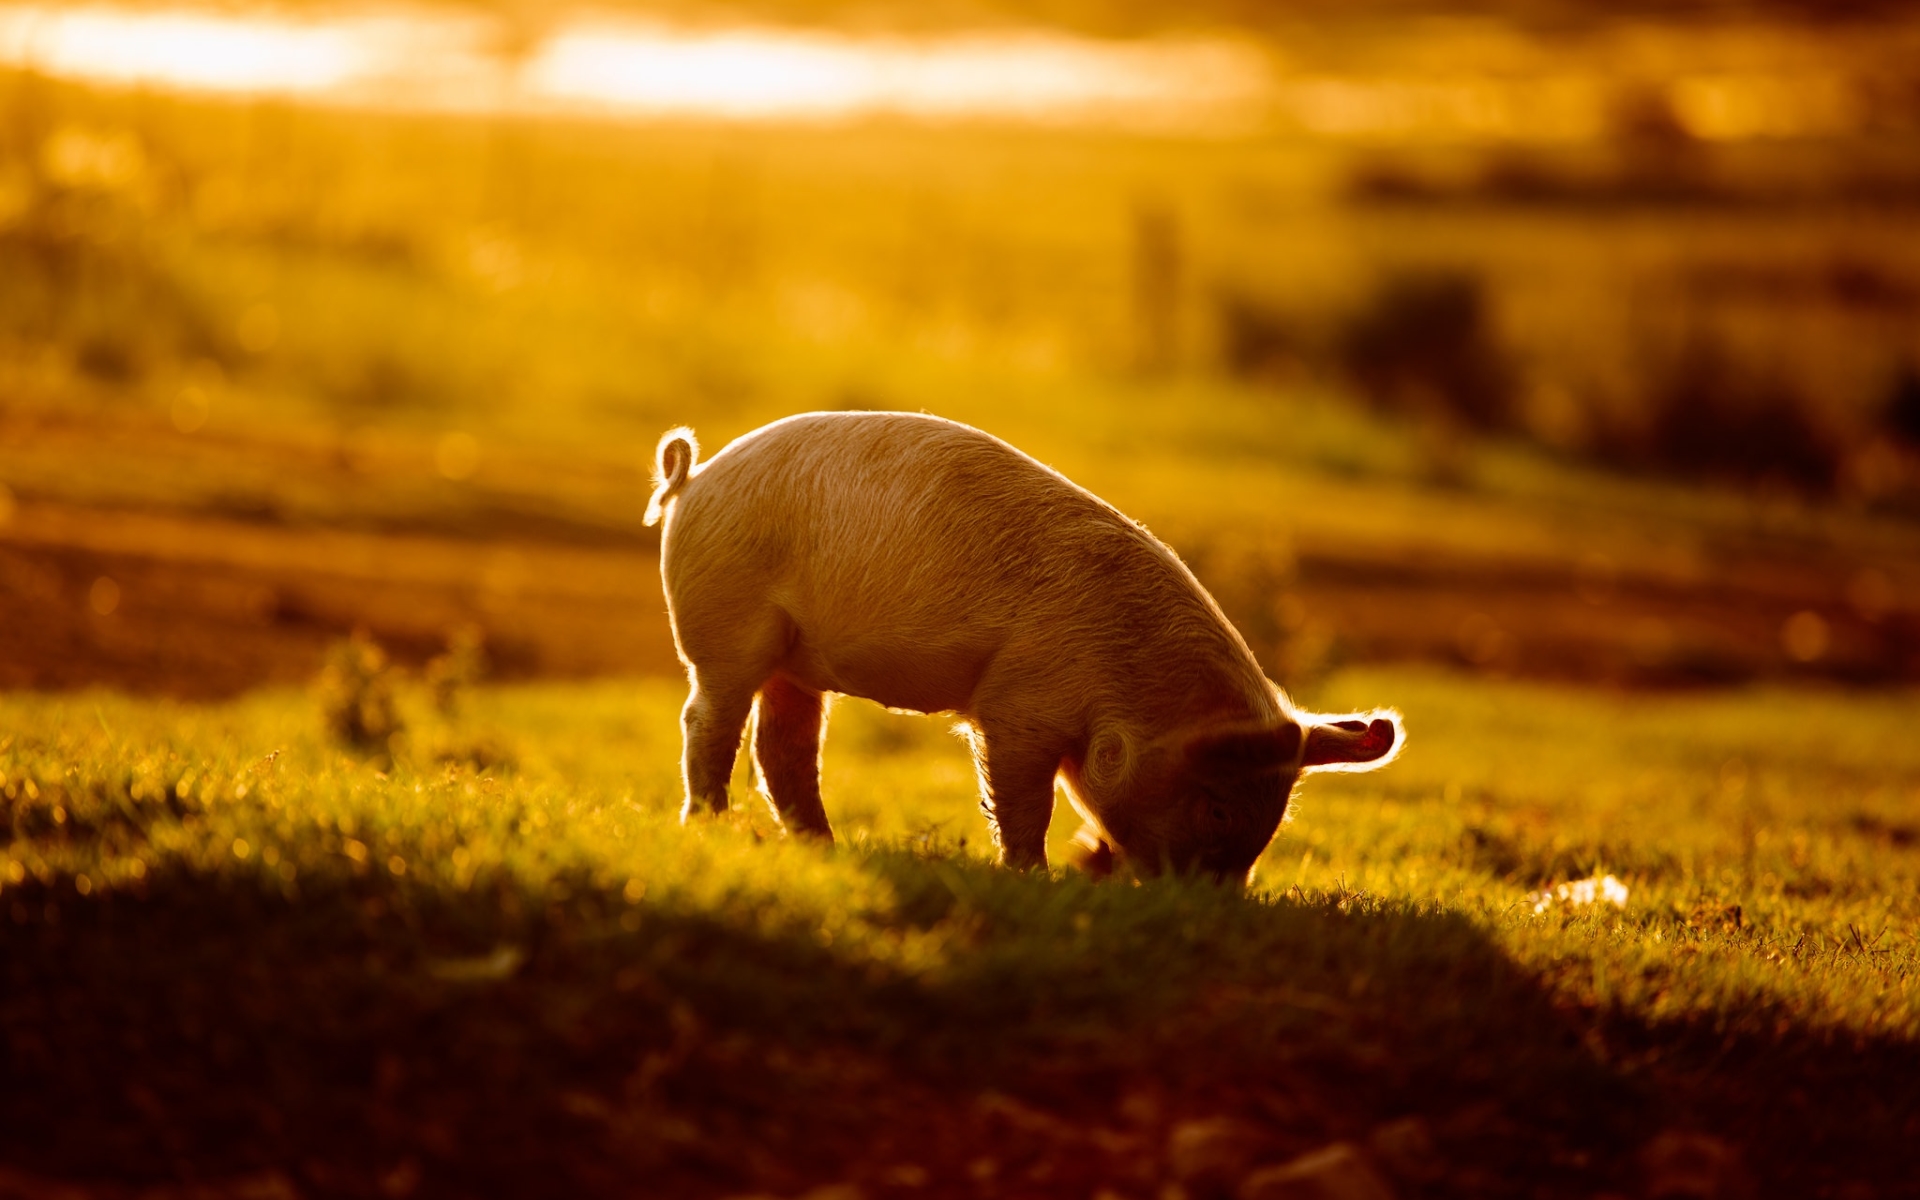 Piglet, Sunset, Small Pig, Farm, Pigs, Funny Animals, - Pig In The Sunset - HD Wallpaper 